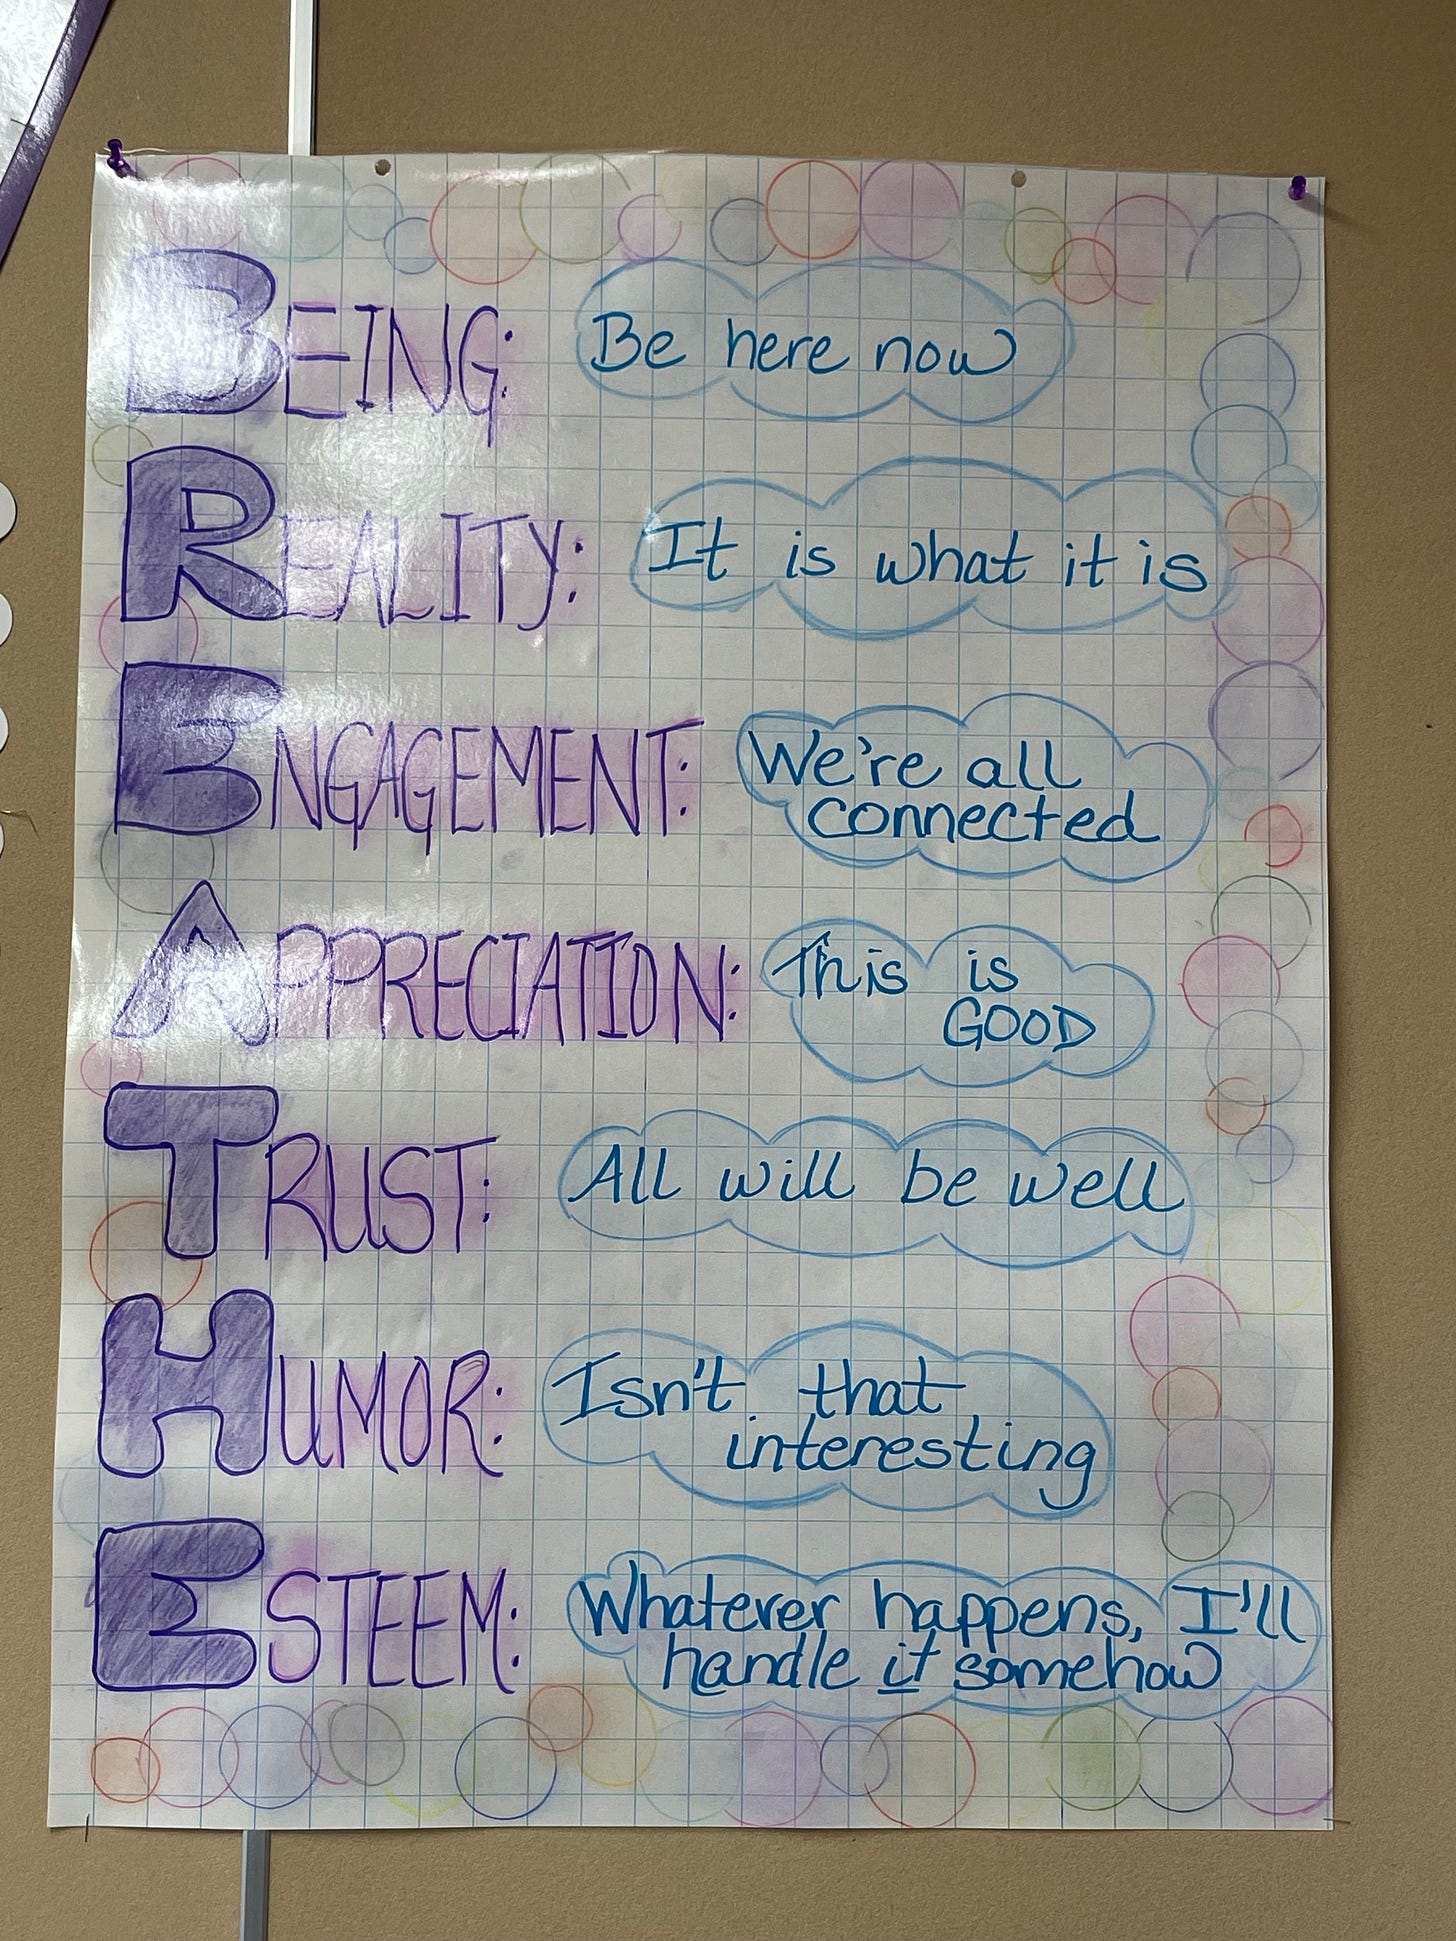 The Poster in the Classroom